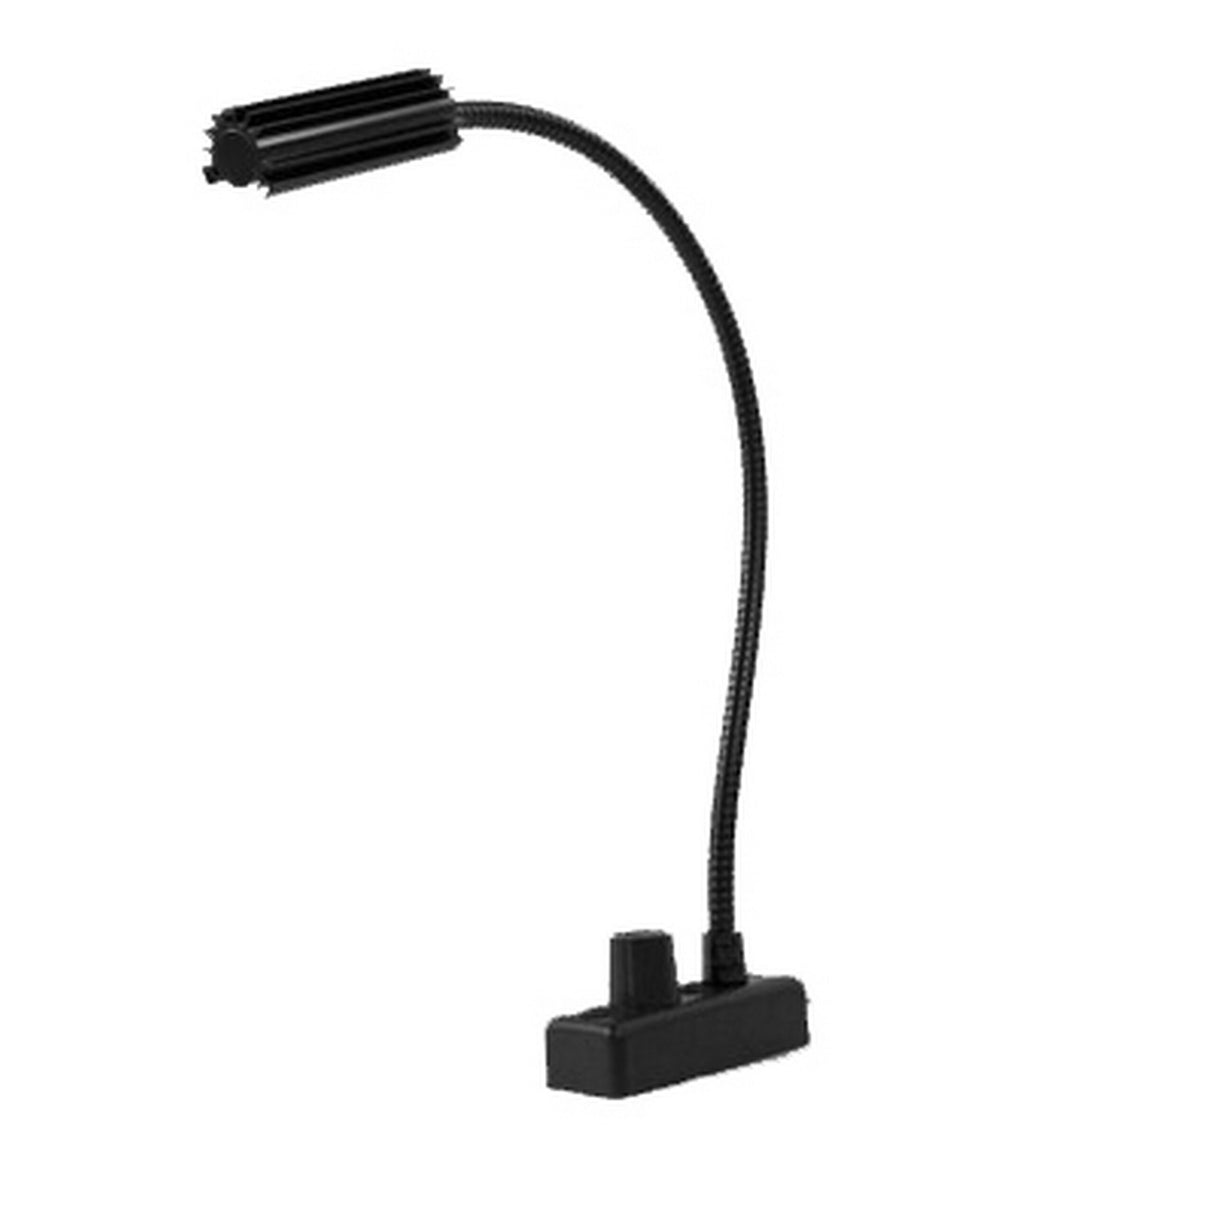 Littlite L-3/18A 18 Inch High Intensity Gooseneck Lampset with No Power Supply